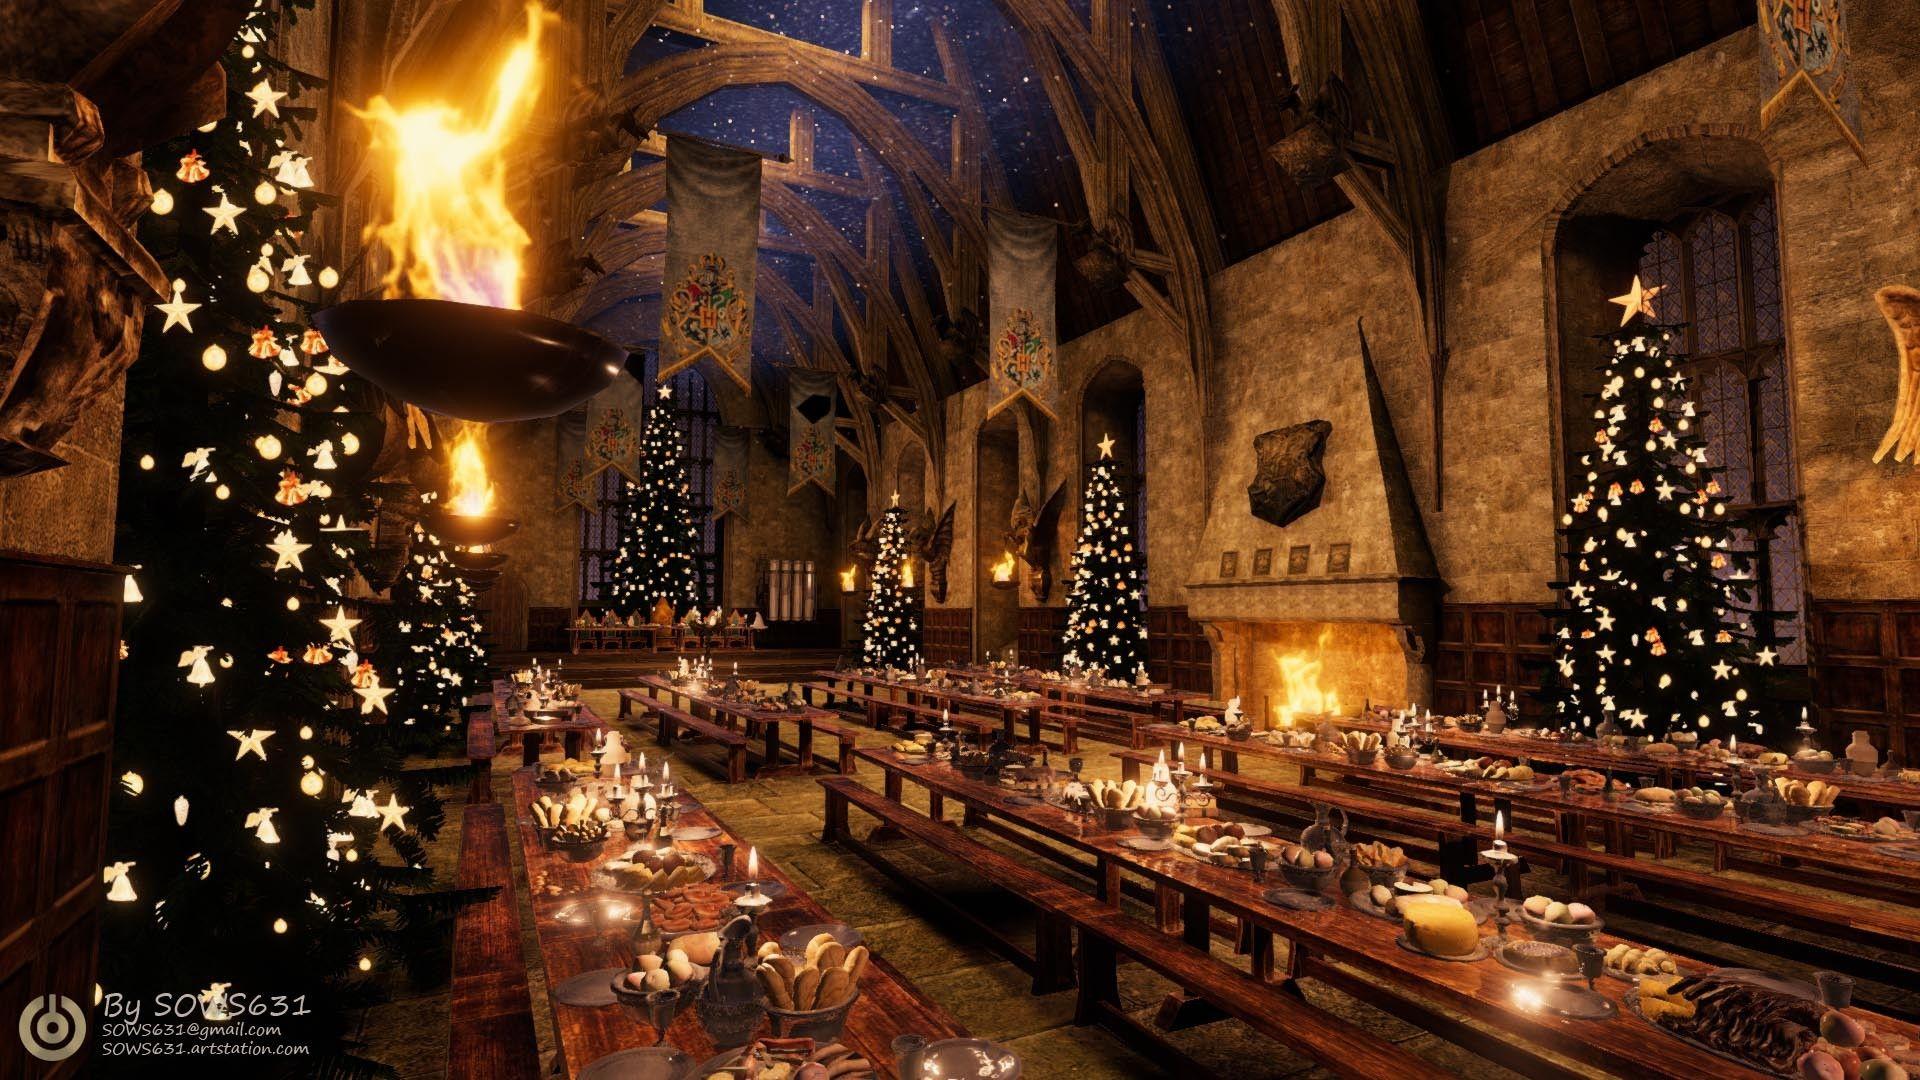 Merry Christmas Harry Potter Wallpapers - Wallpaper Cave